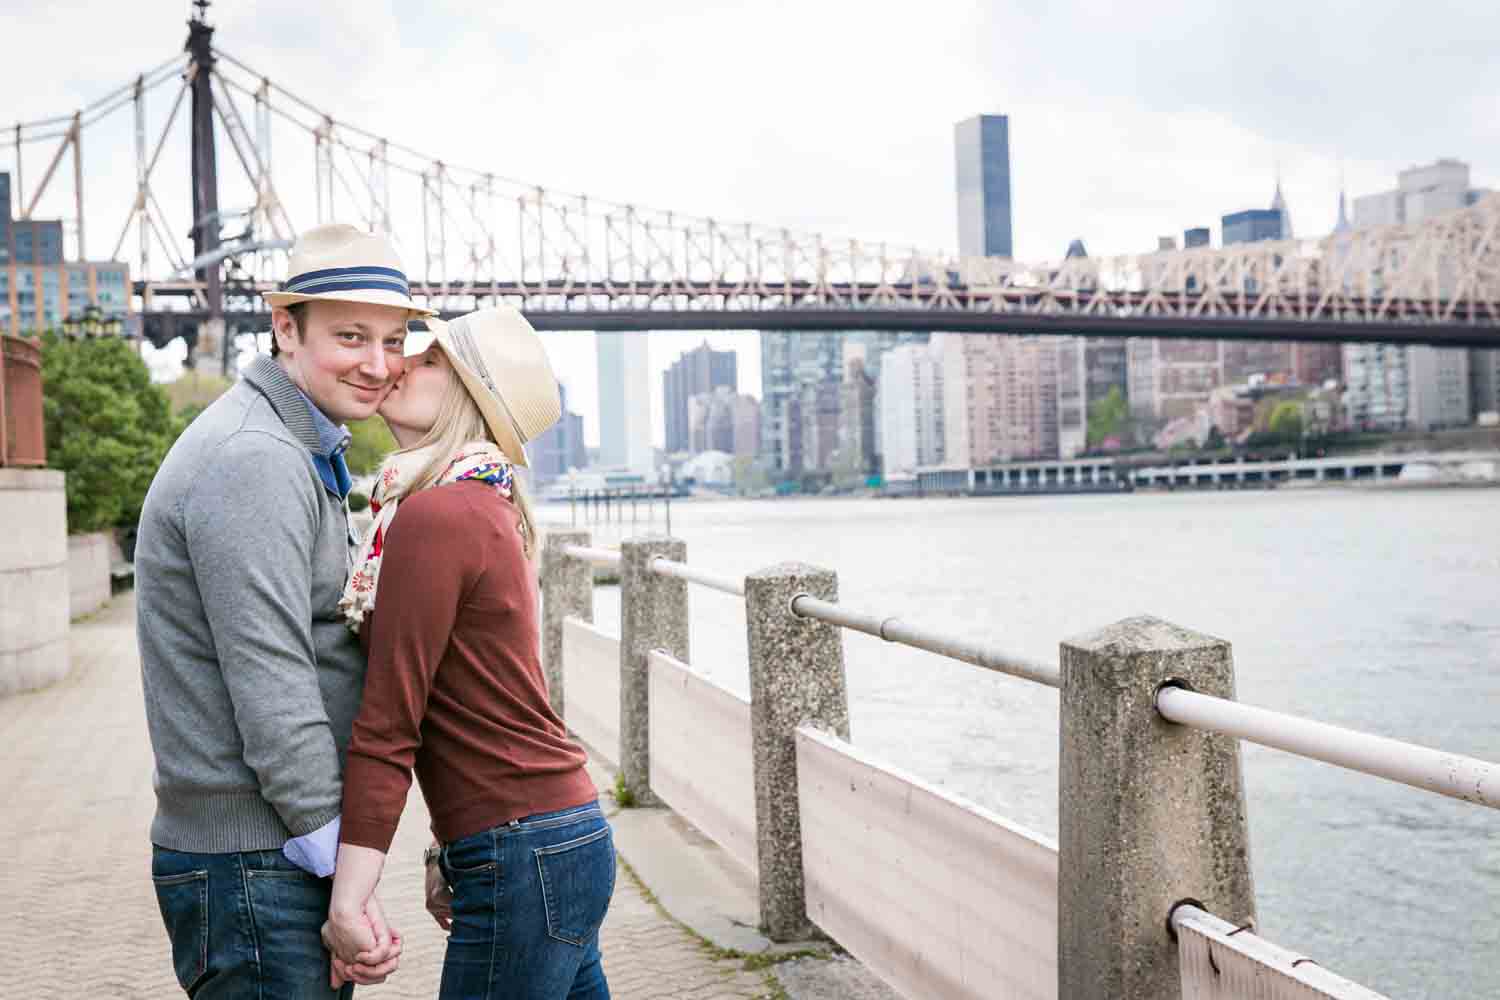 Woman kissing man on cheek during a Roosevelt Island engagement portrait session